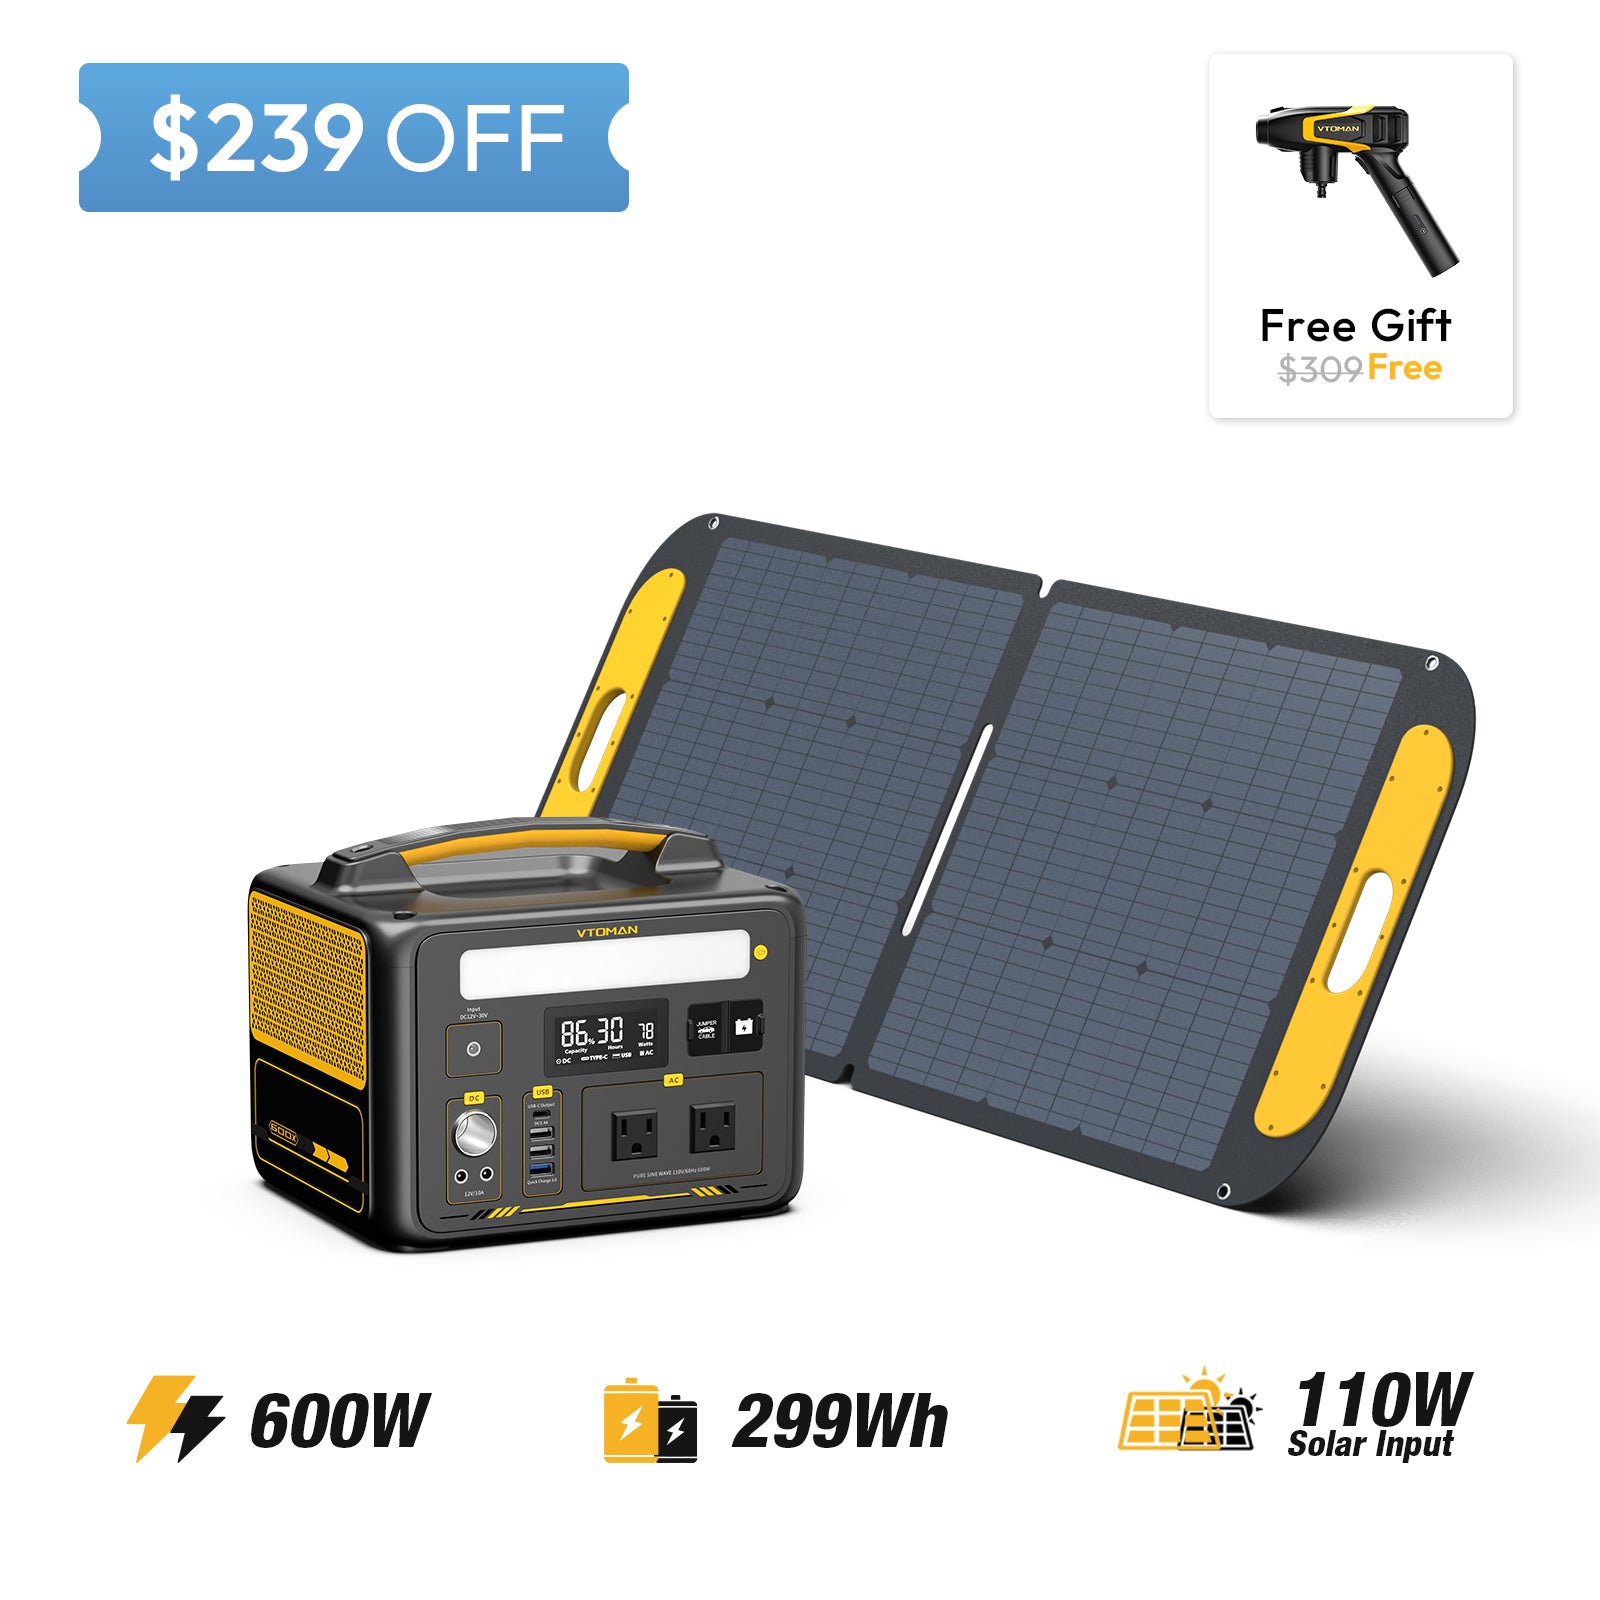 Jump 600x and 110w solar panel save $239in summer sale